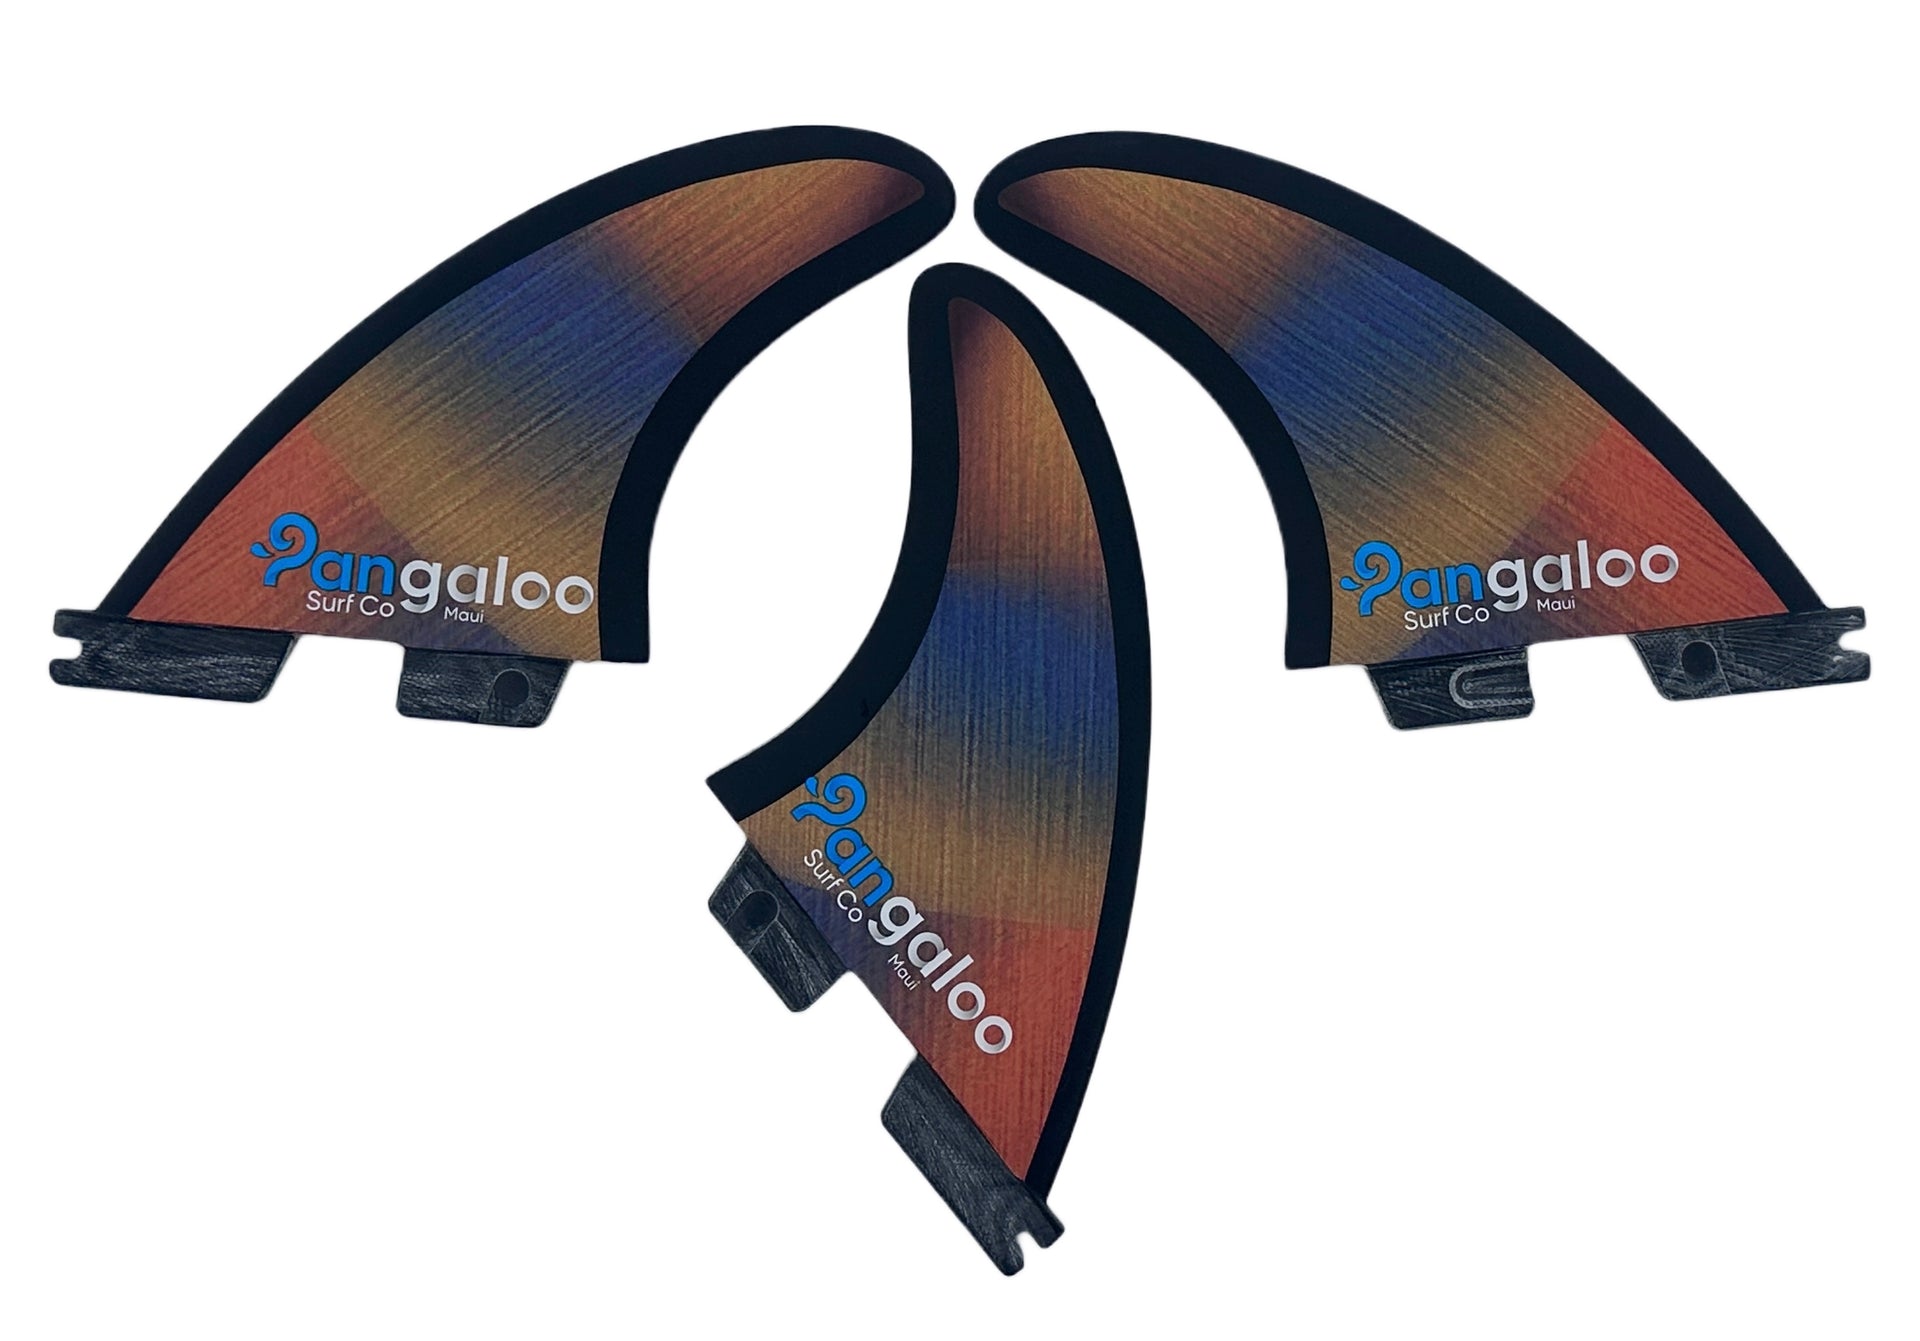 Thruster Surf Fins - Co (Prismatic) - – Surf Fin Box Size Pangaloo FCSII Small